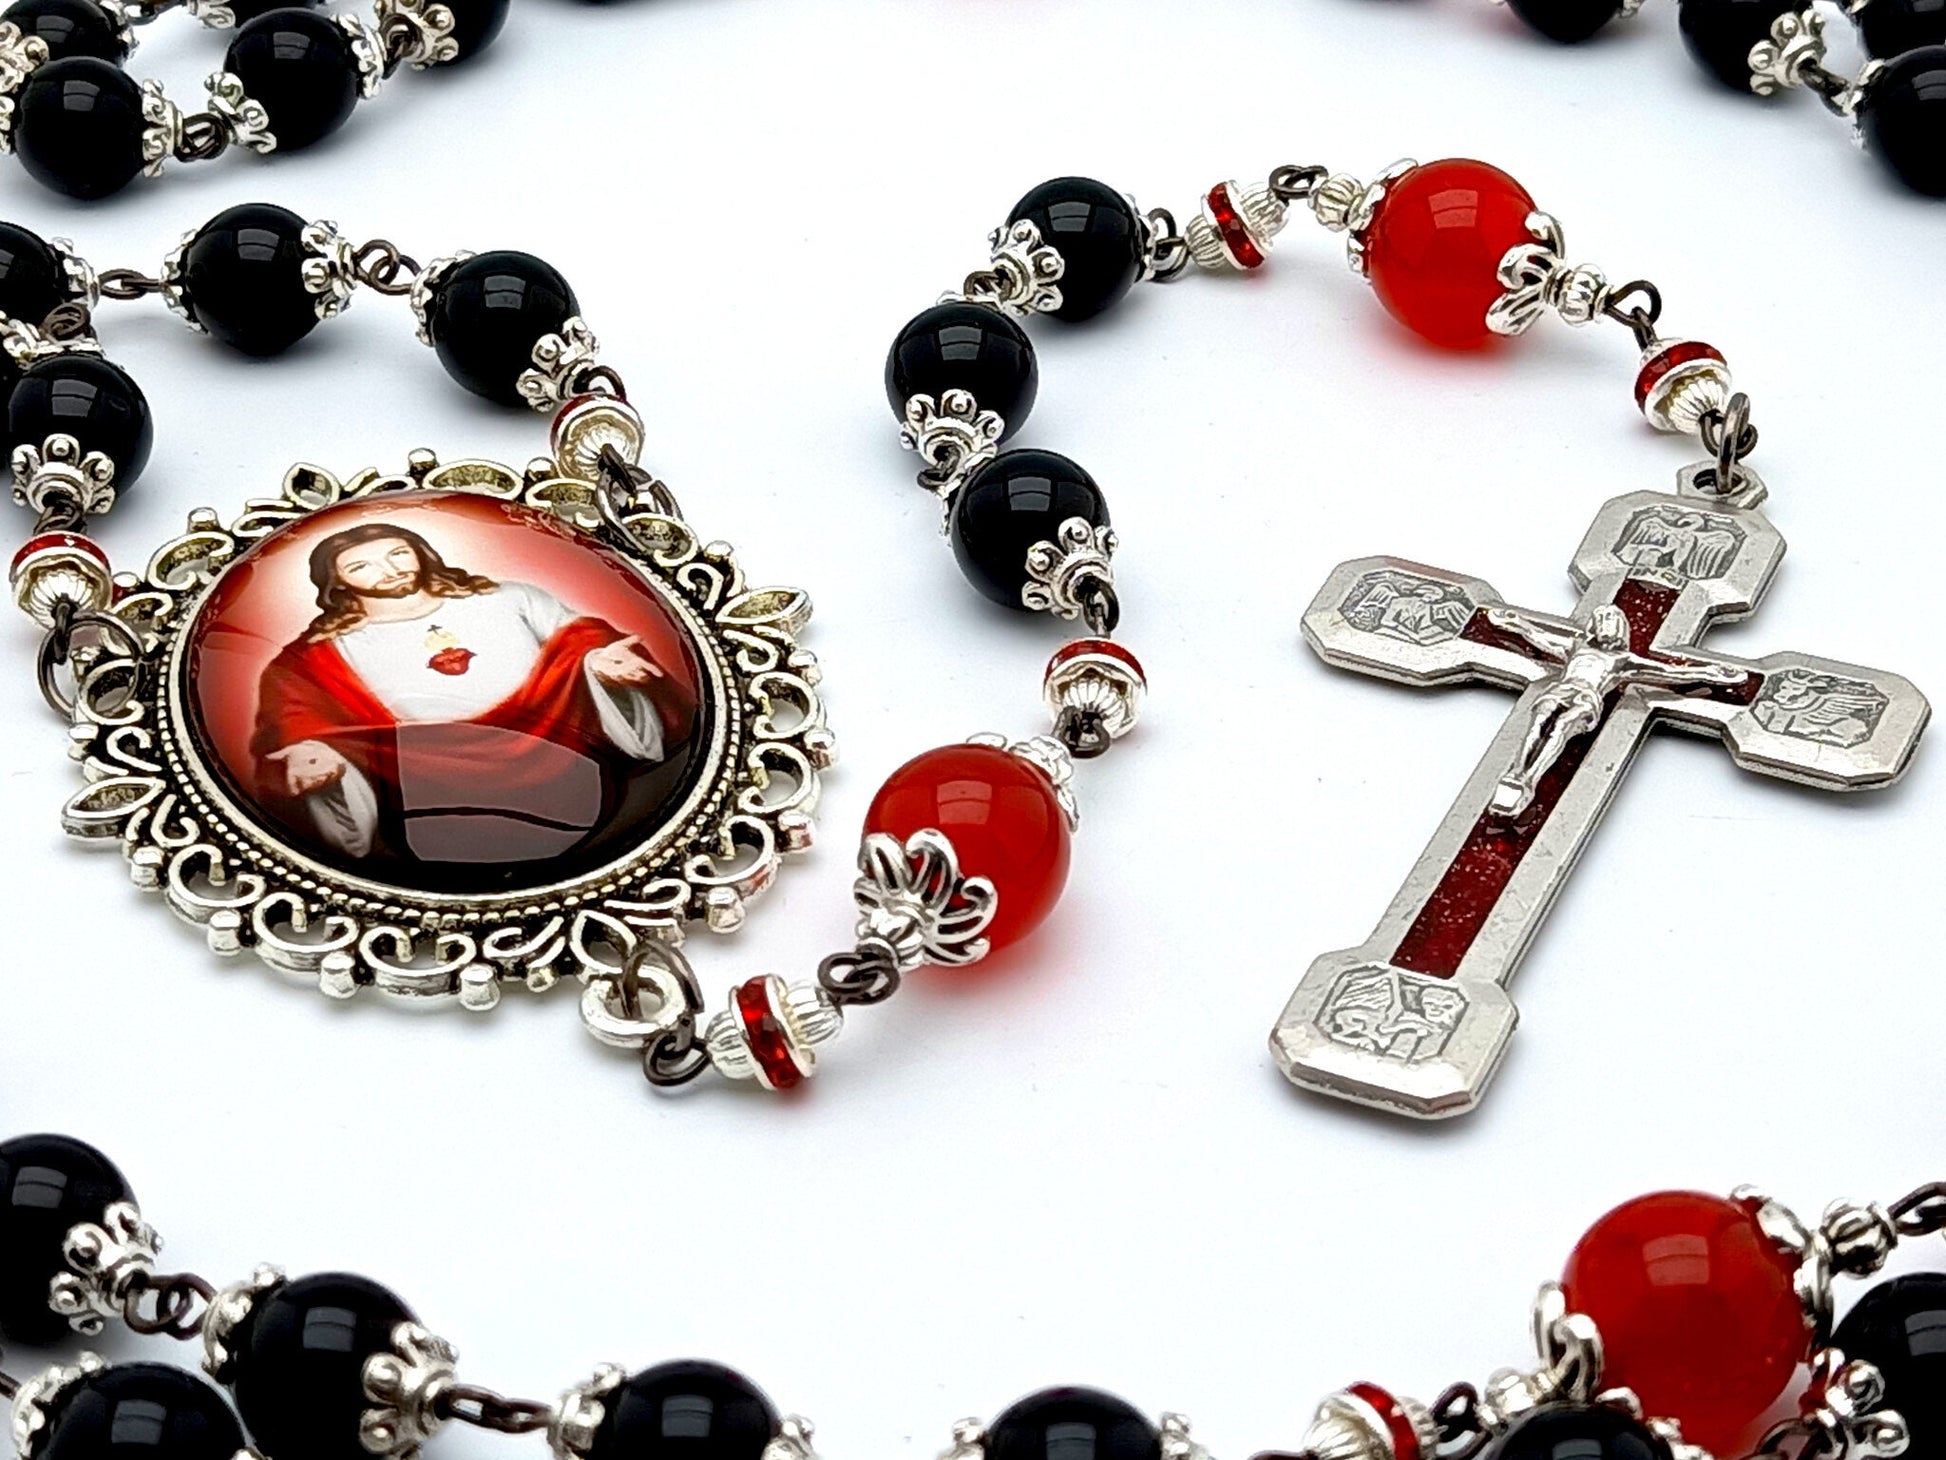 Sacred Heart unique rosary beads with black onyx and red gemstone beads, red enamel crucifix and large picture centre medal.